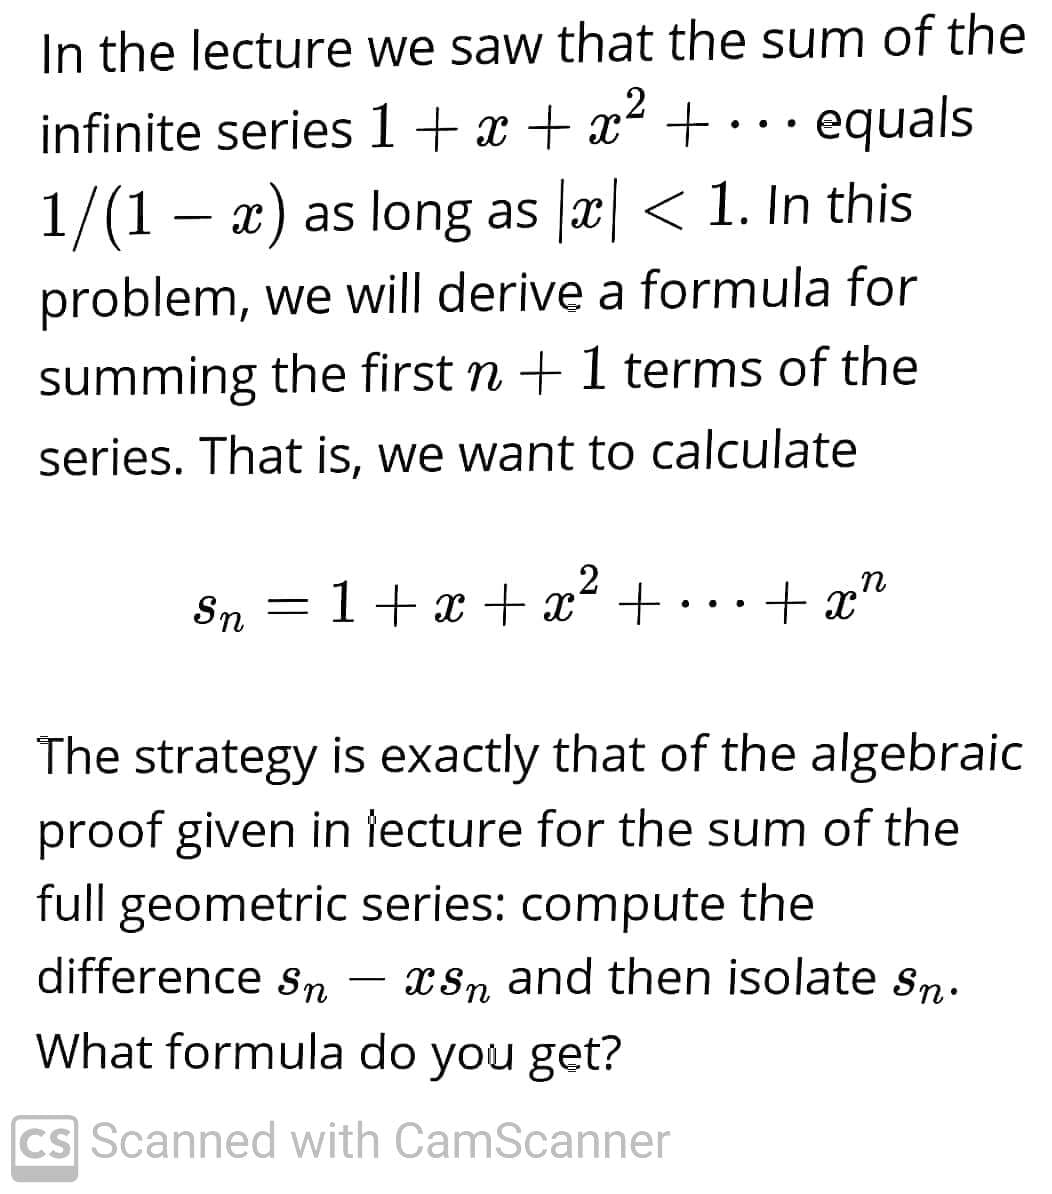 In the lecture we saw that the sum of the
infinite series 1+x + x² + • · equals
..
1/(1 – x) as long as x < 1. In this
problem, we will derive a formula for
summing the first n +1 terms of the
series. That is, we want to calculate
Sn
1+ x + x² +
+ x"
..
The strategy is exactly that of the algebraic
proof given in lecture for the sum of the
full geometric series: compute the
difference sn
xSn and then isolate sn.
What formula do you get?
